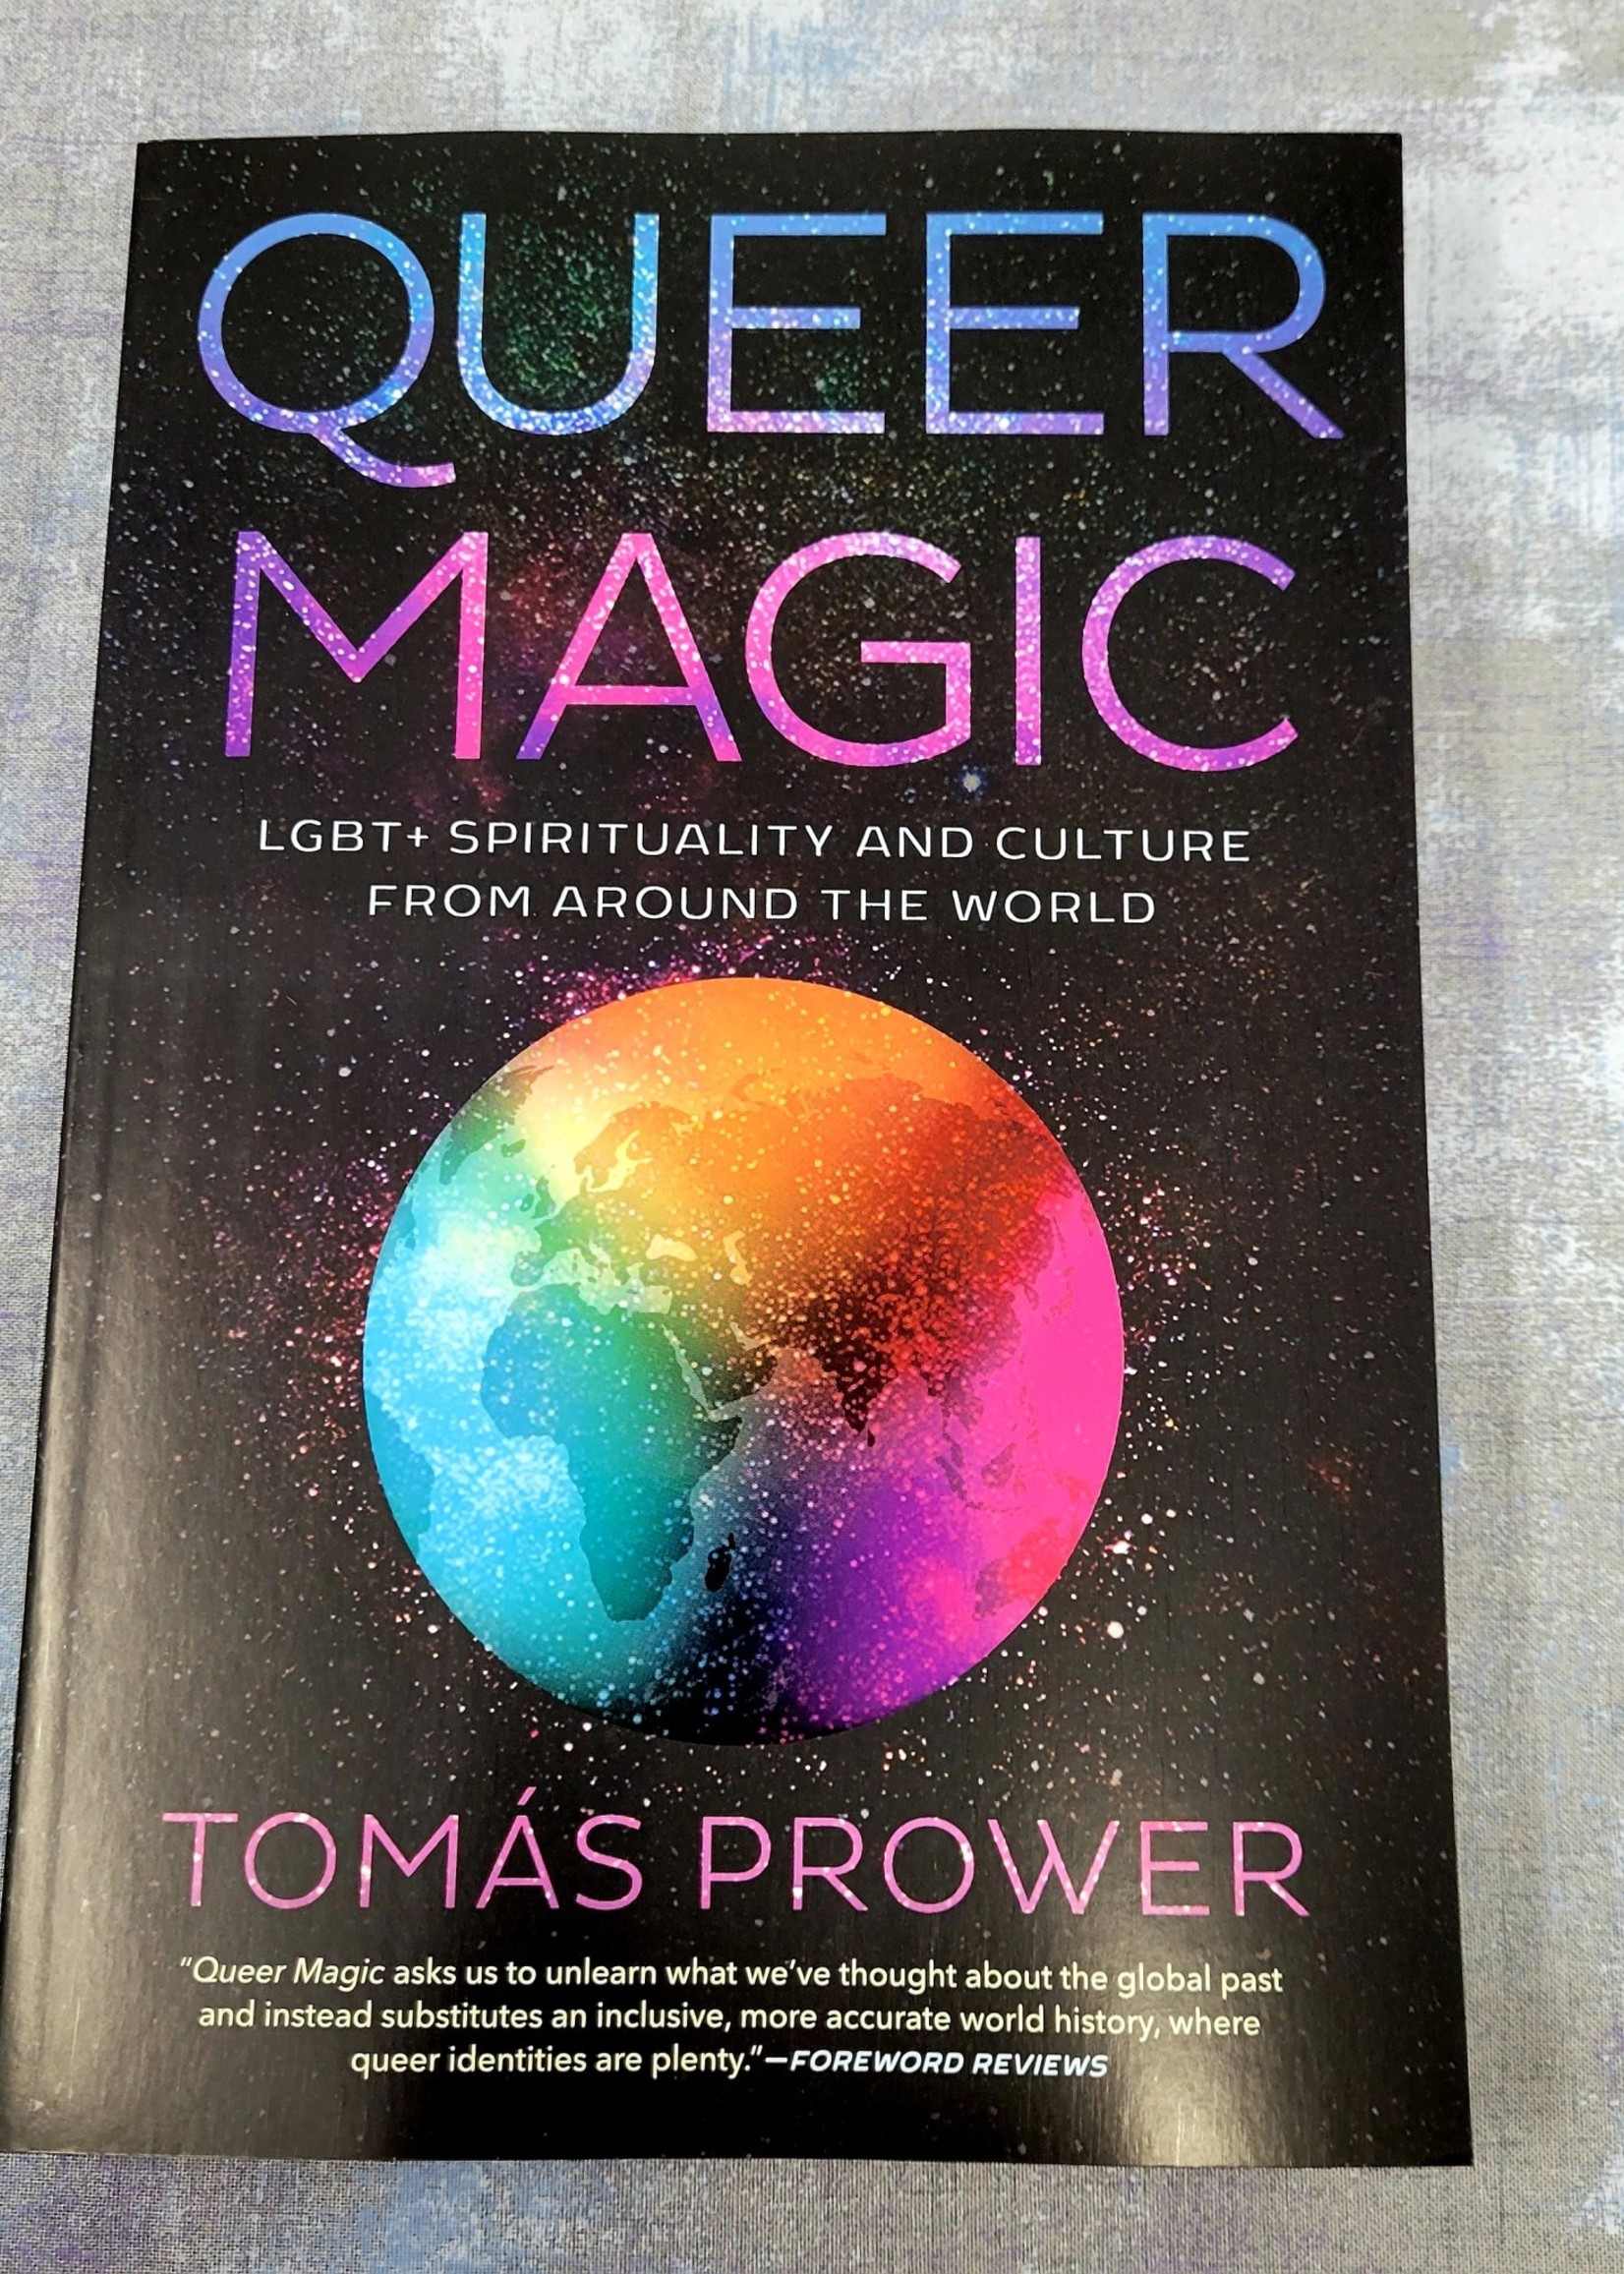 Queer Magic - by Tomás Prower